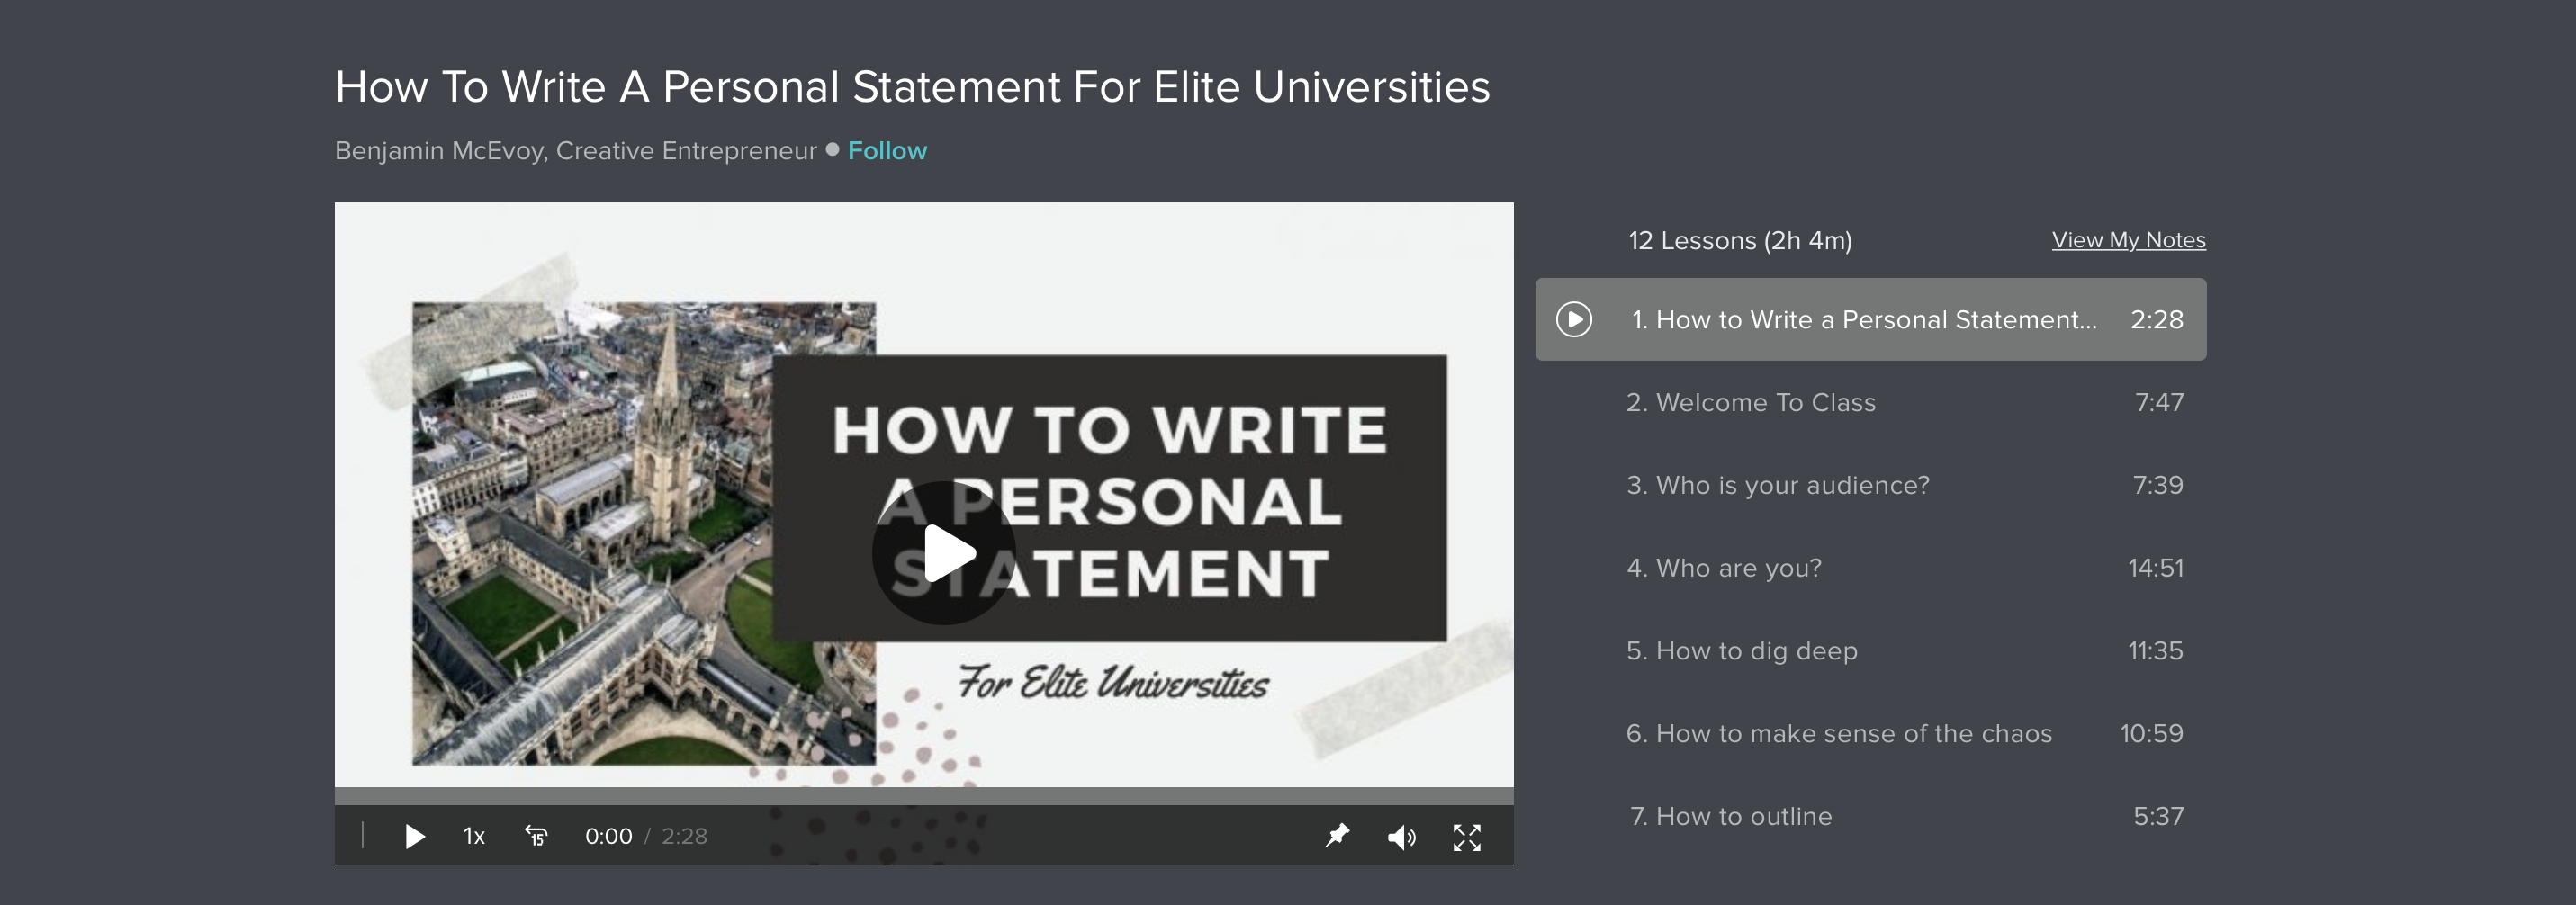 how to write a personal statement for elite universities skillshare review